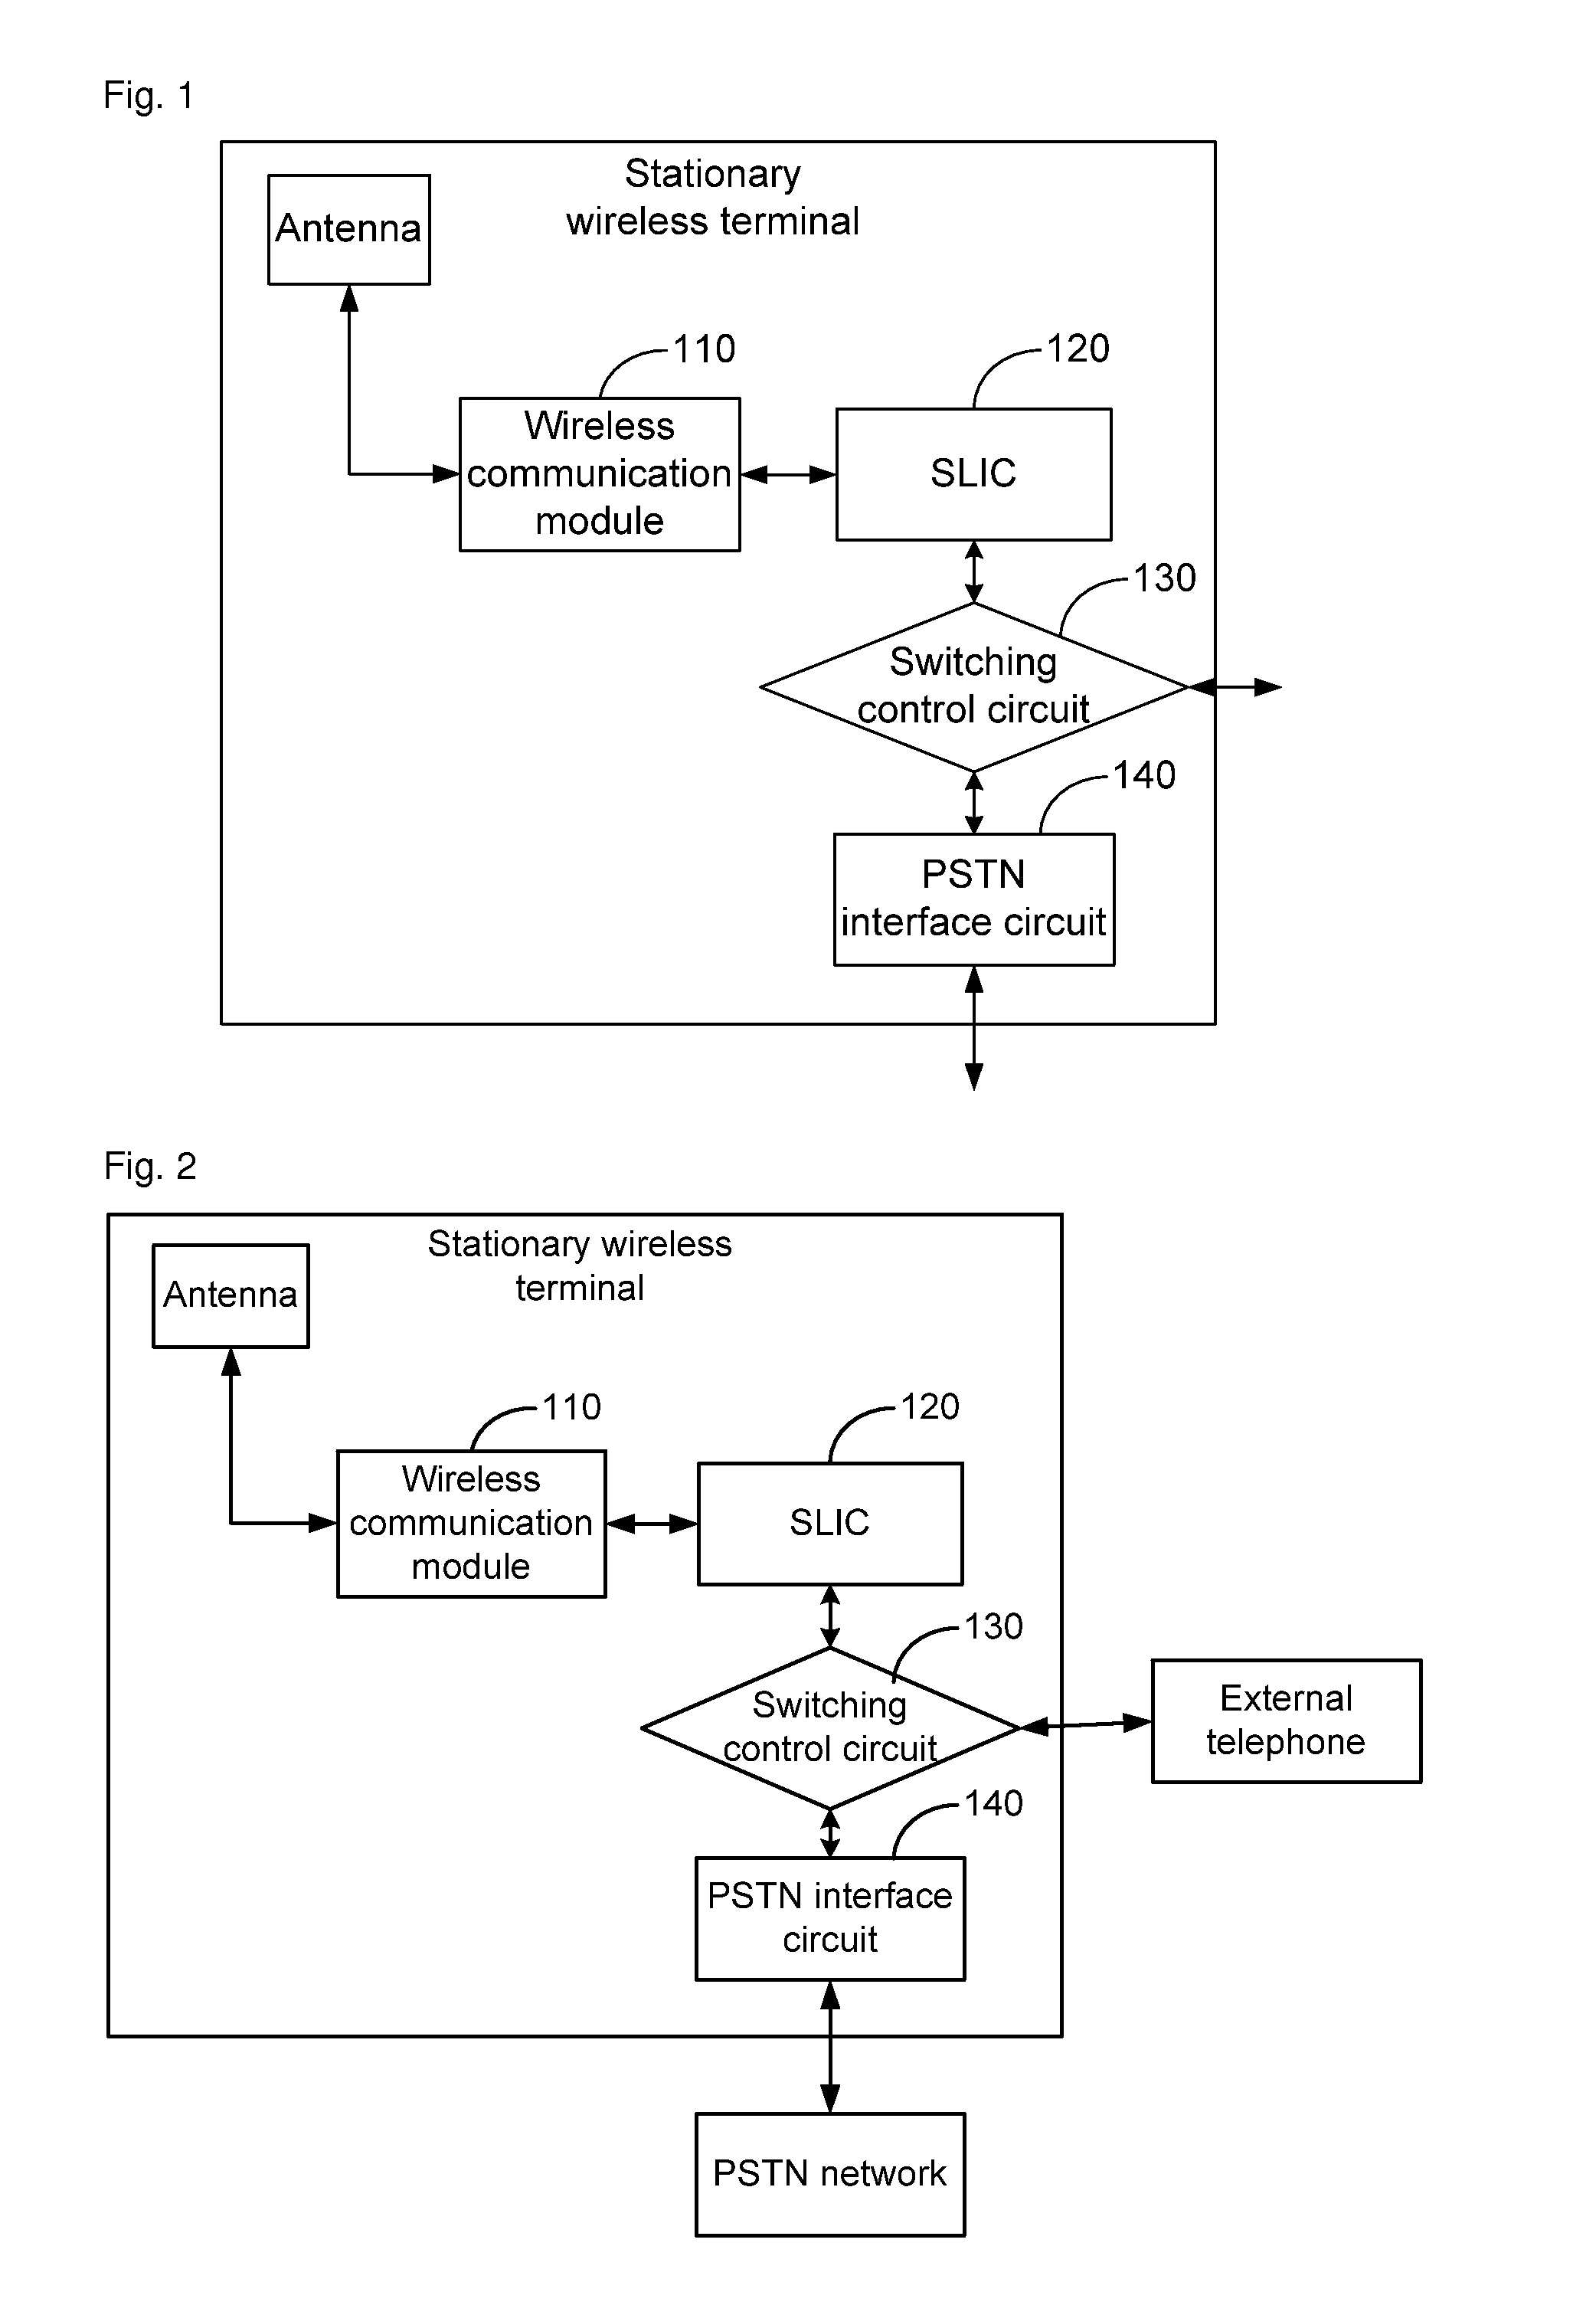 Stationary wireless terminal and switching method for automatically switching communication lines